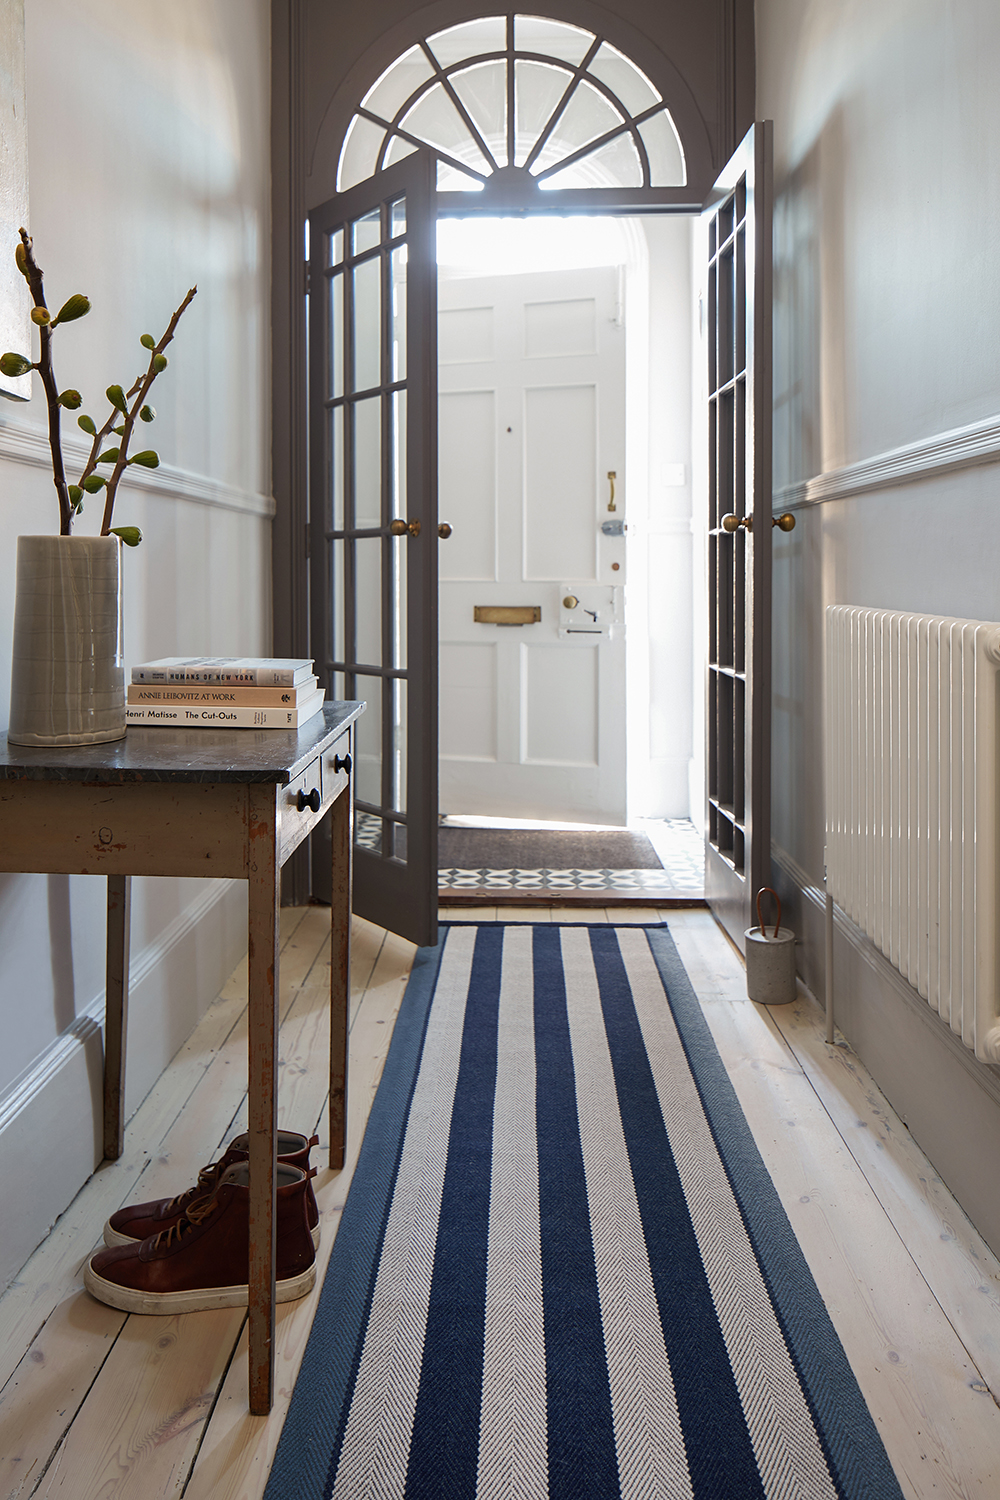 Hallway Rugs 10 Ideas To Add Style, How Big Should A Runner Rug Be